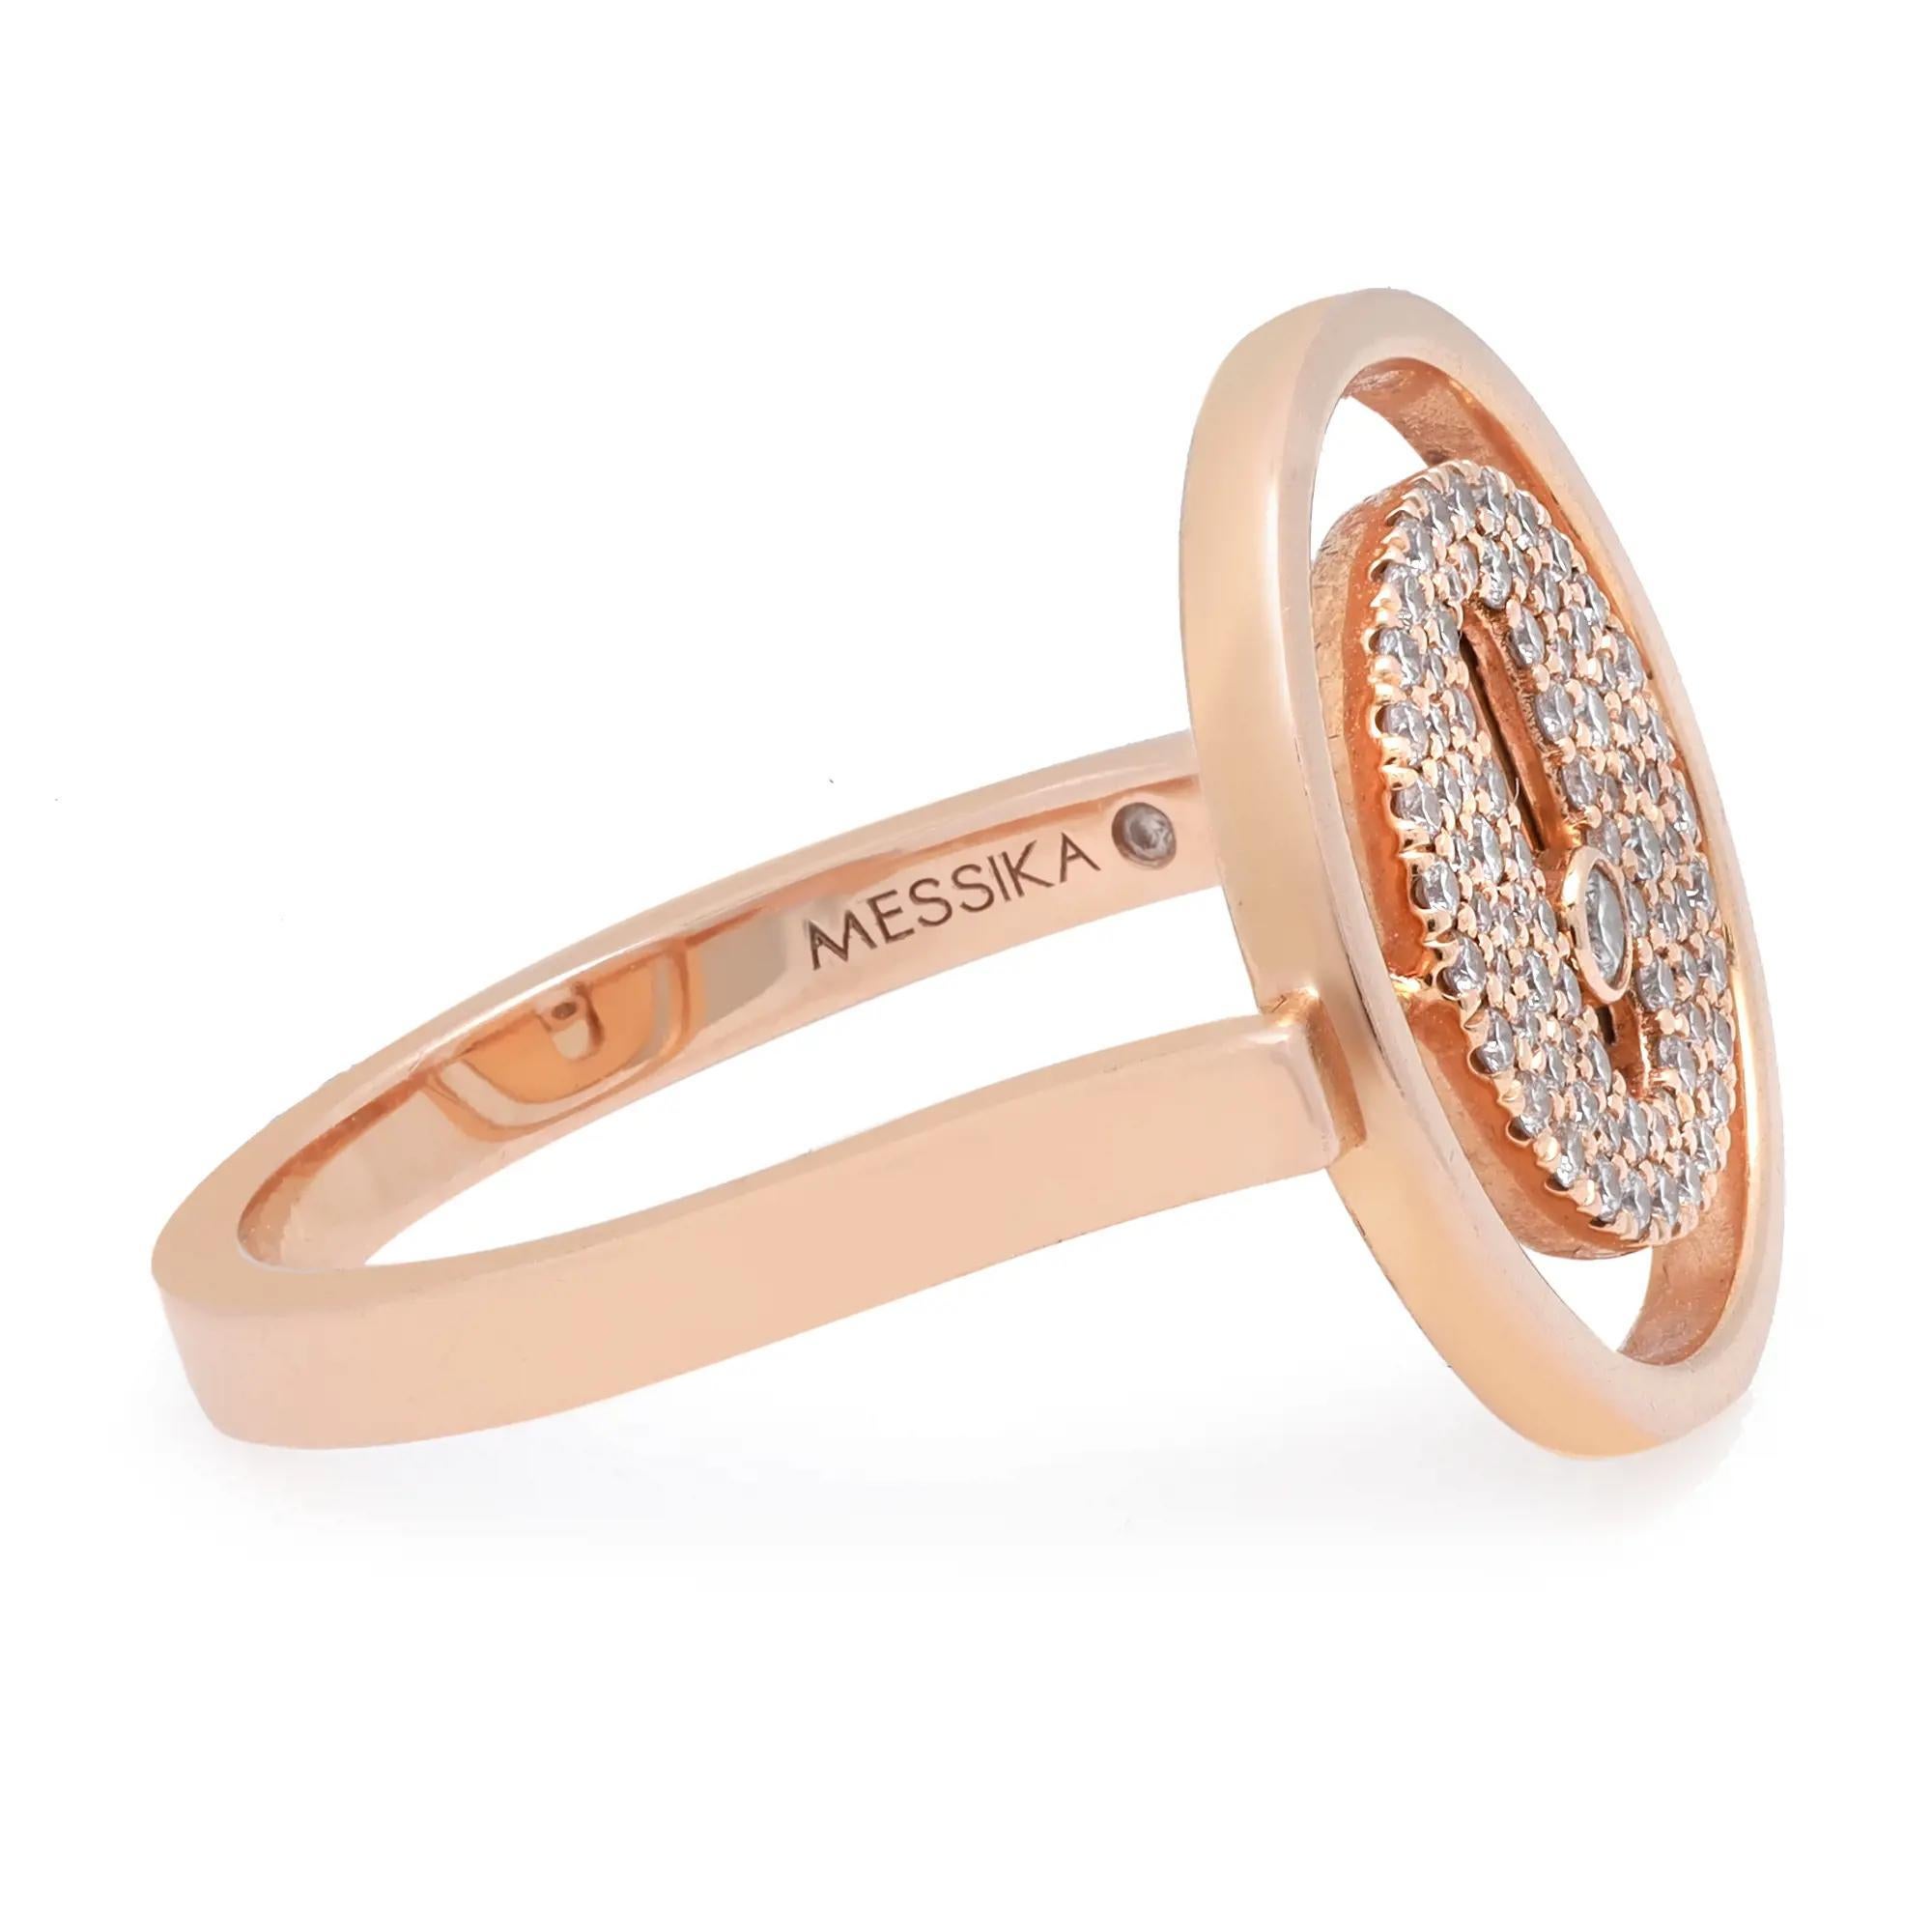 Round Cut Messika Lucky Move Pm Diamond Ring 18K Rose Gold 0.15Cttw Size 5.5